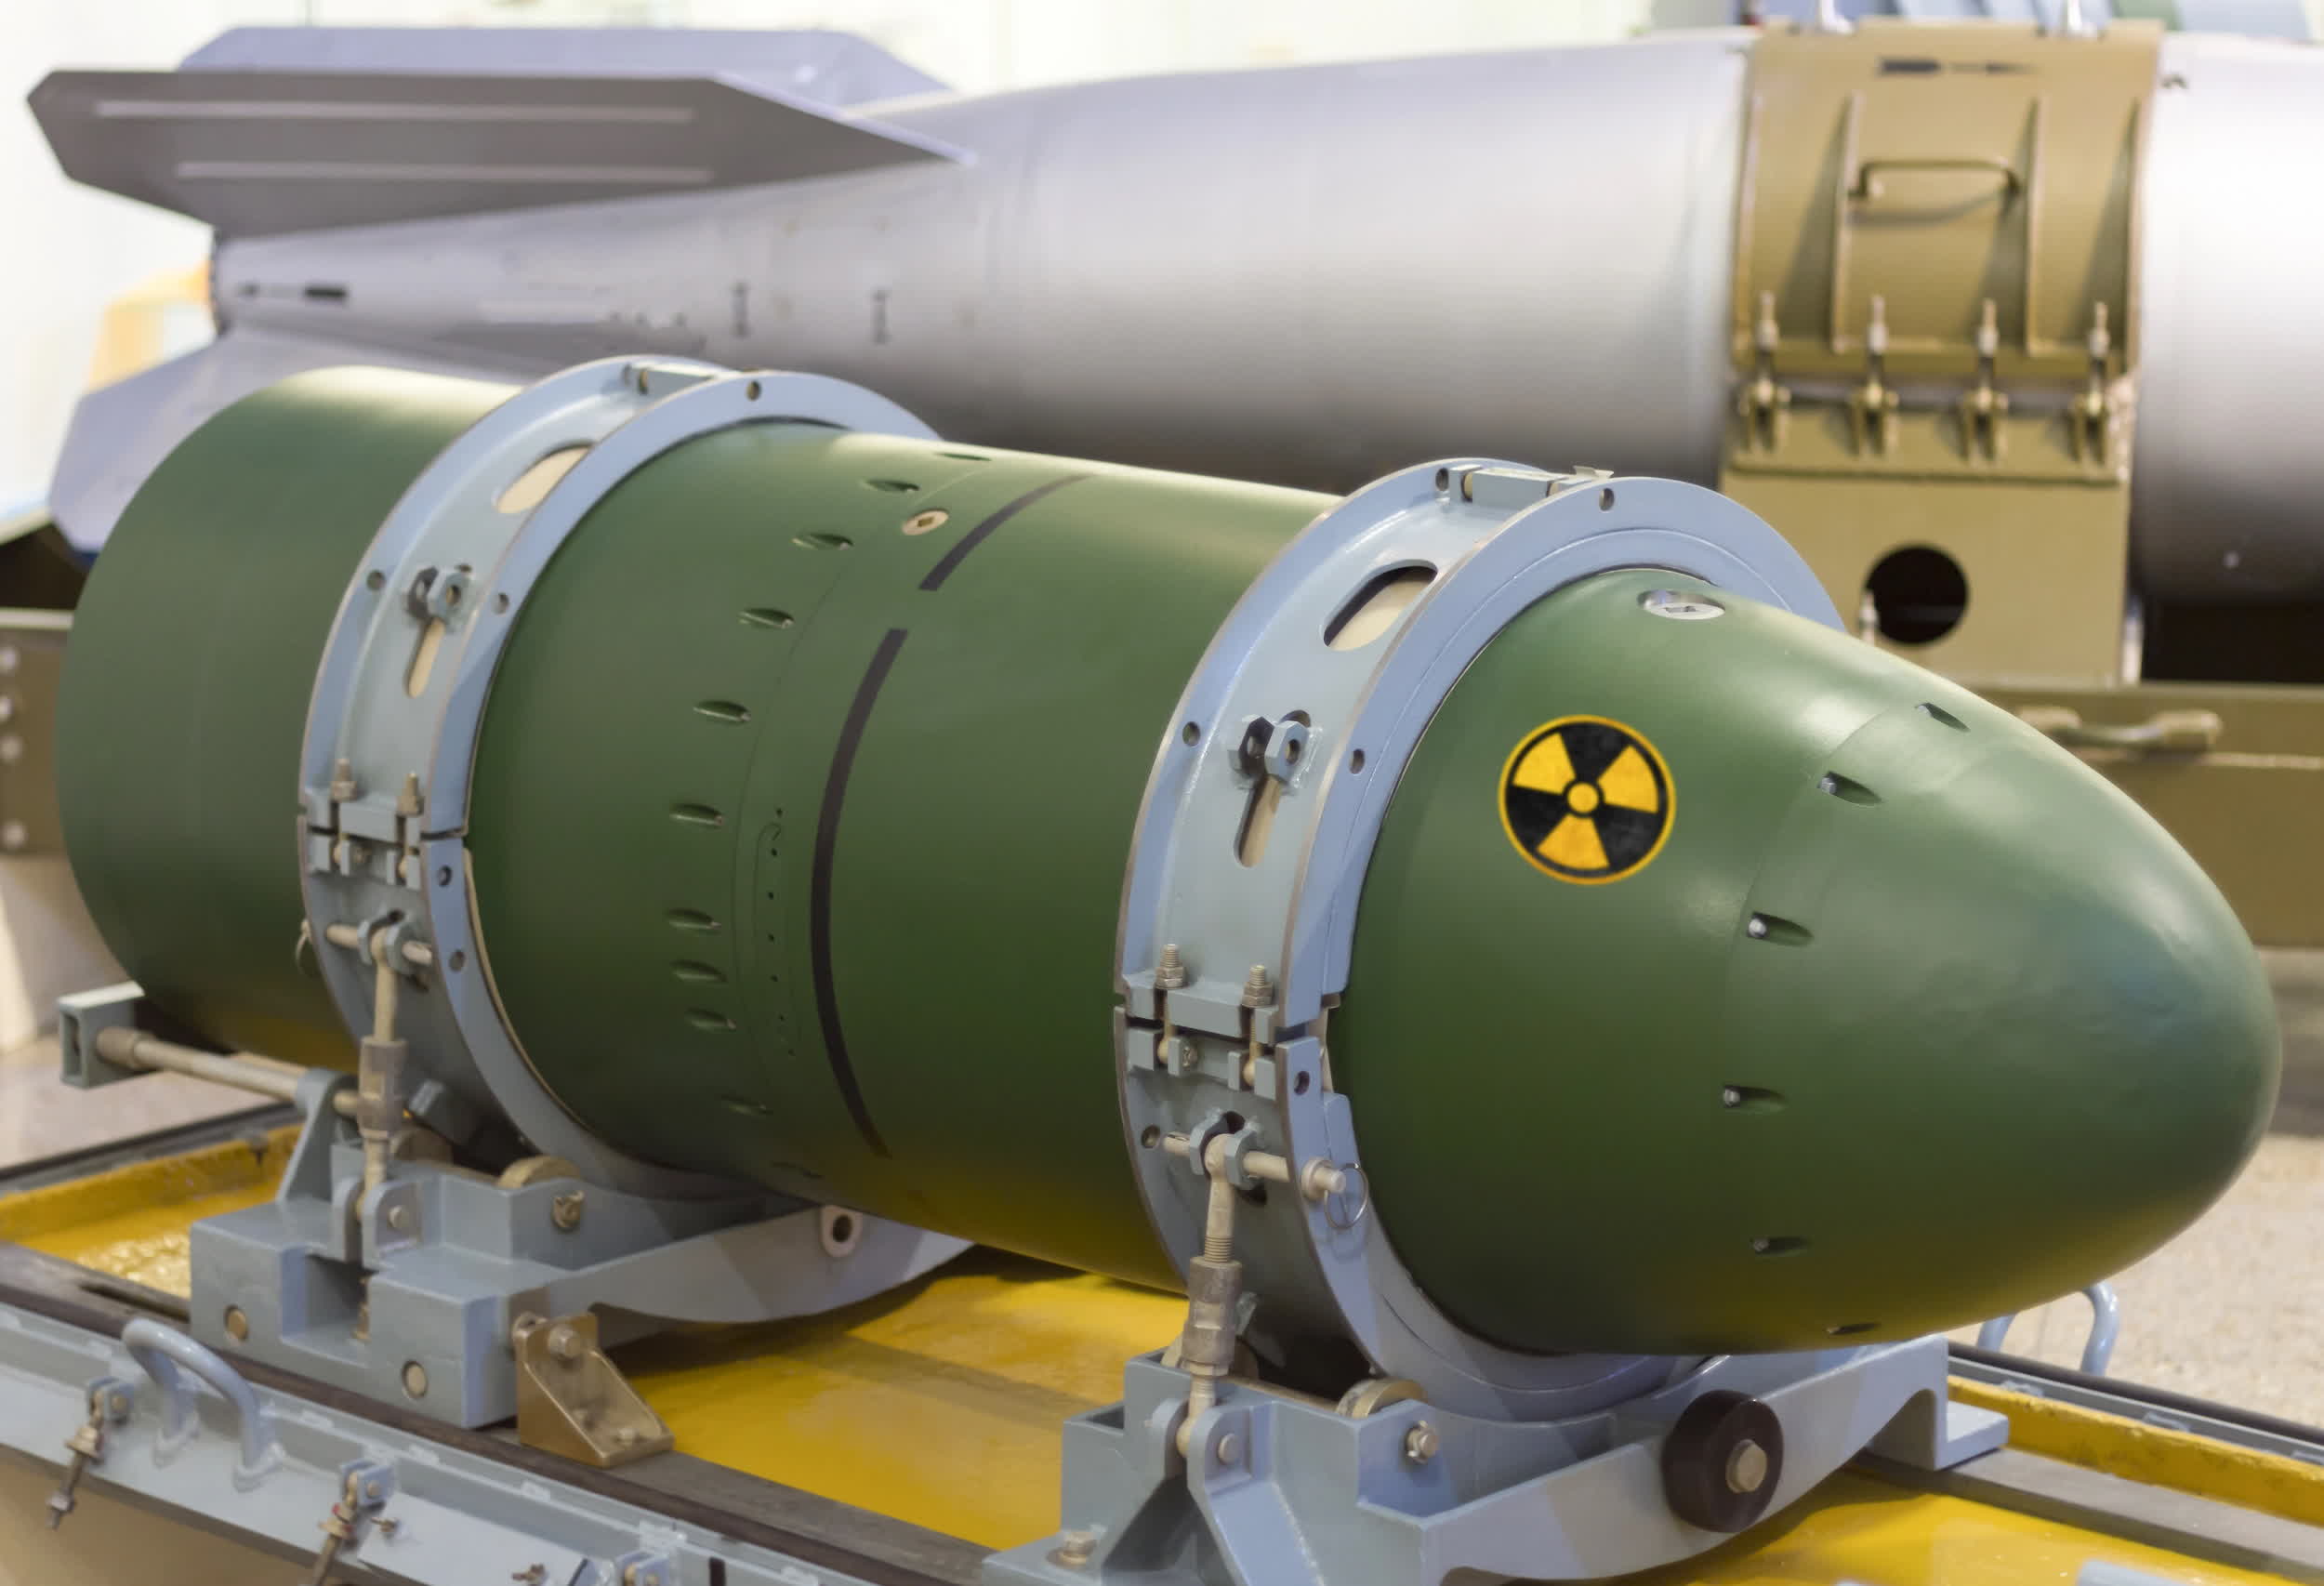 US national lab is using machine learning to detect rogue nuclear threats